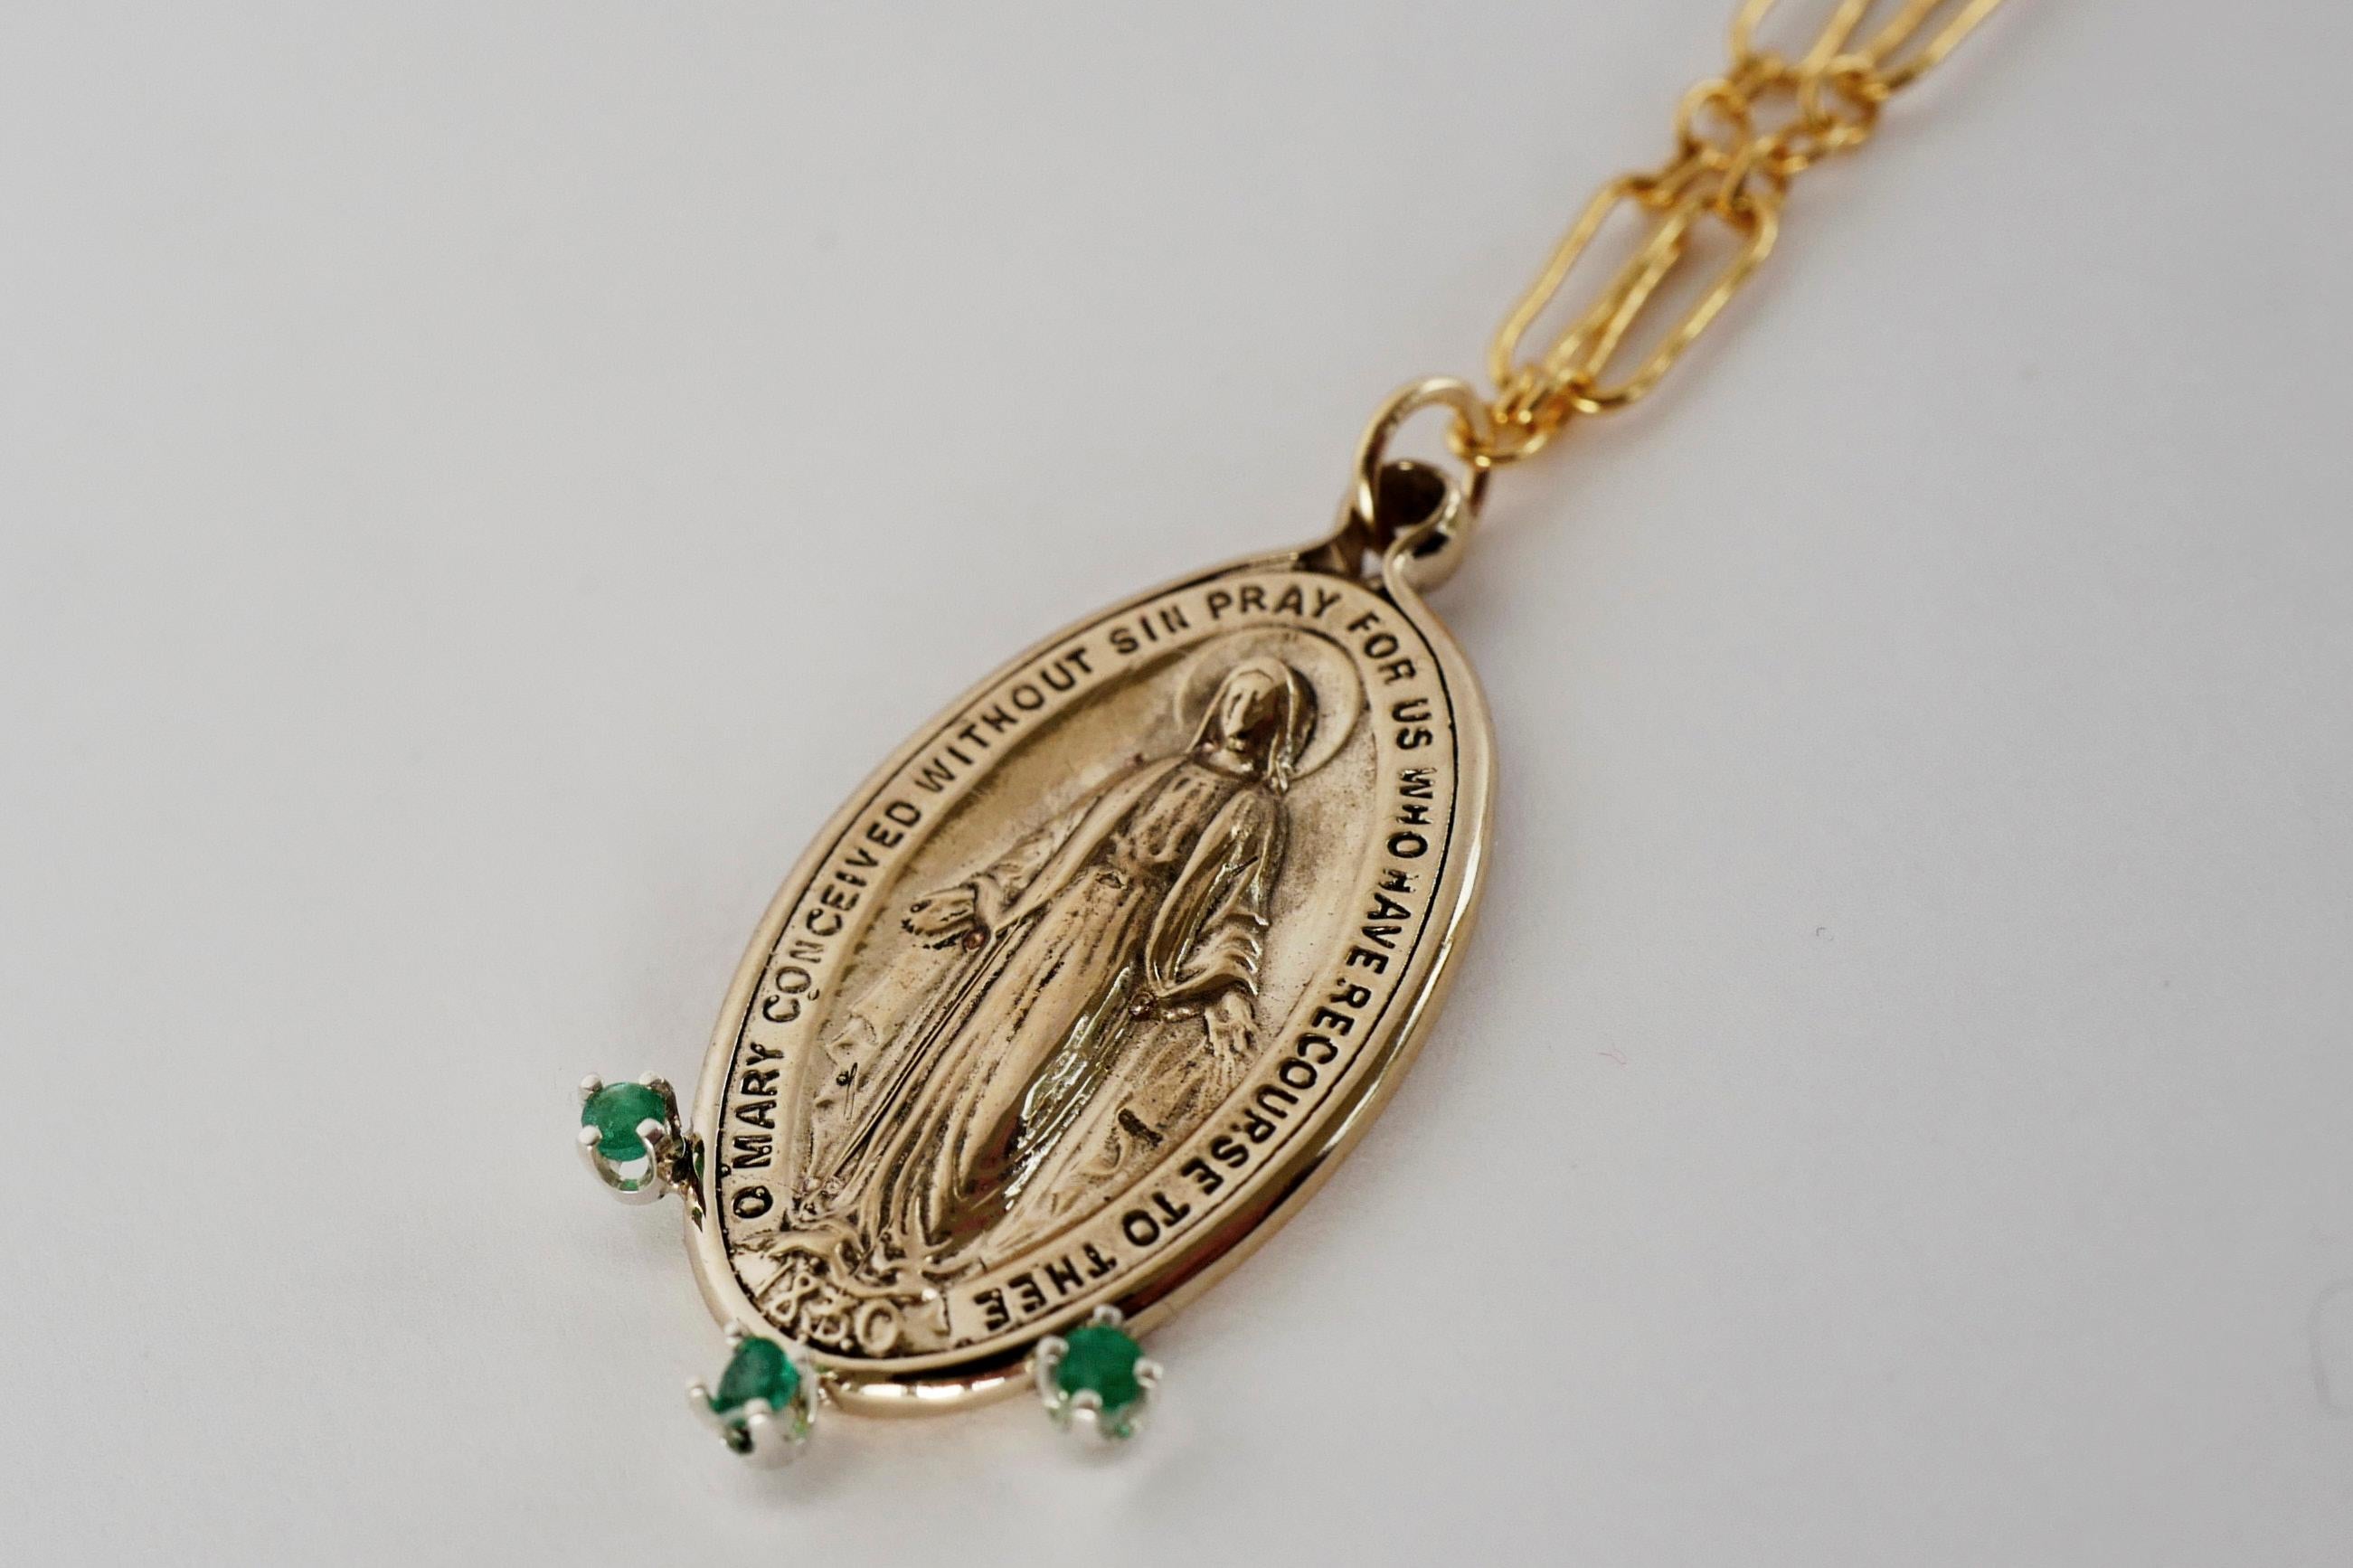 Emerald Virgin Mary Oval Medal Chain Necklace Gold Filled Chain J Dauphin In New Condition For Sale In Los Angeles, CA